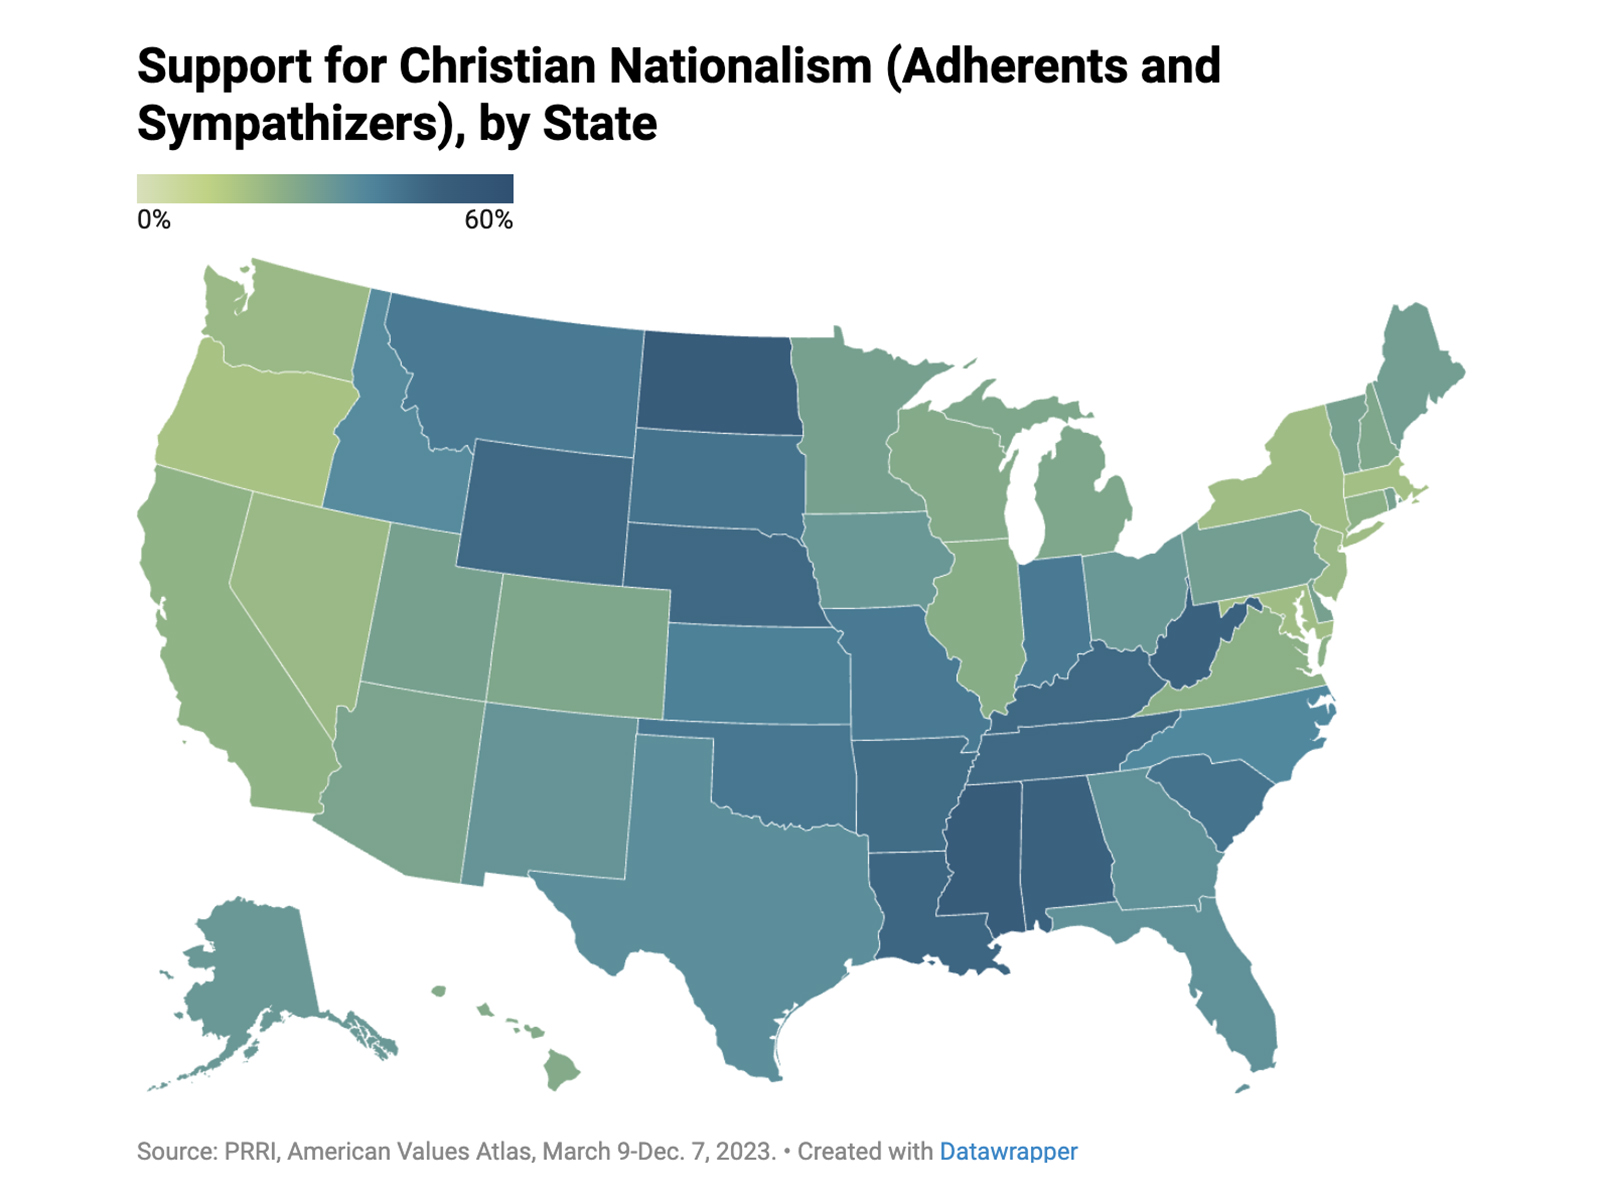 "Support for Christian Nationalism (Adherents and Sympathizers), by State" (Graphic courtesy PRRI)